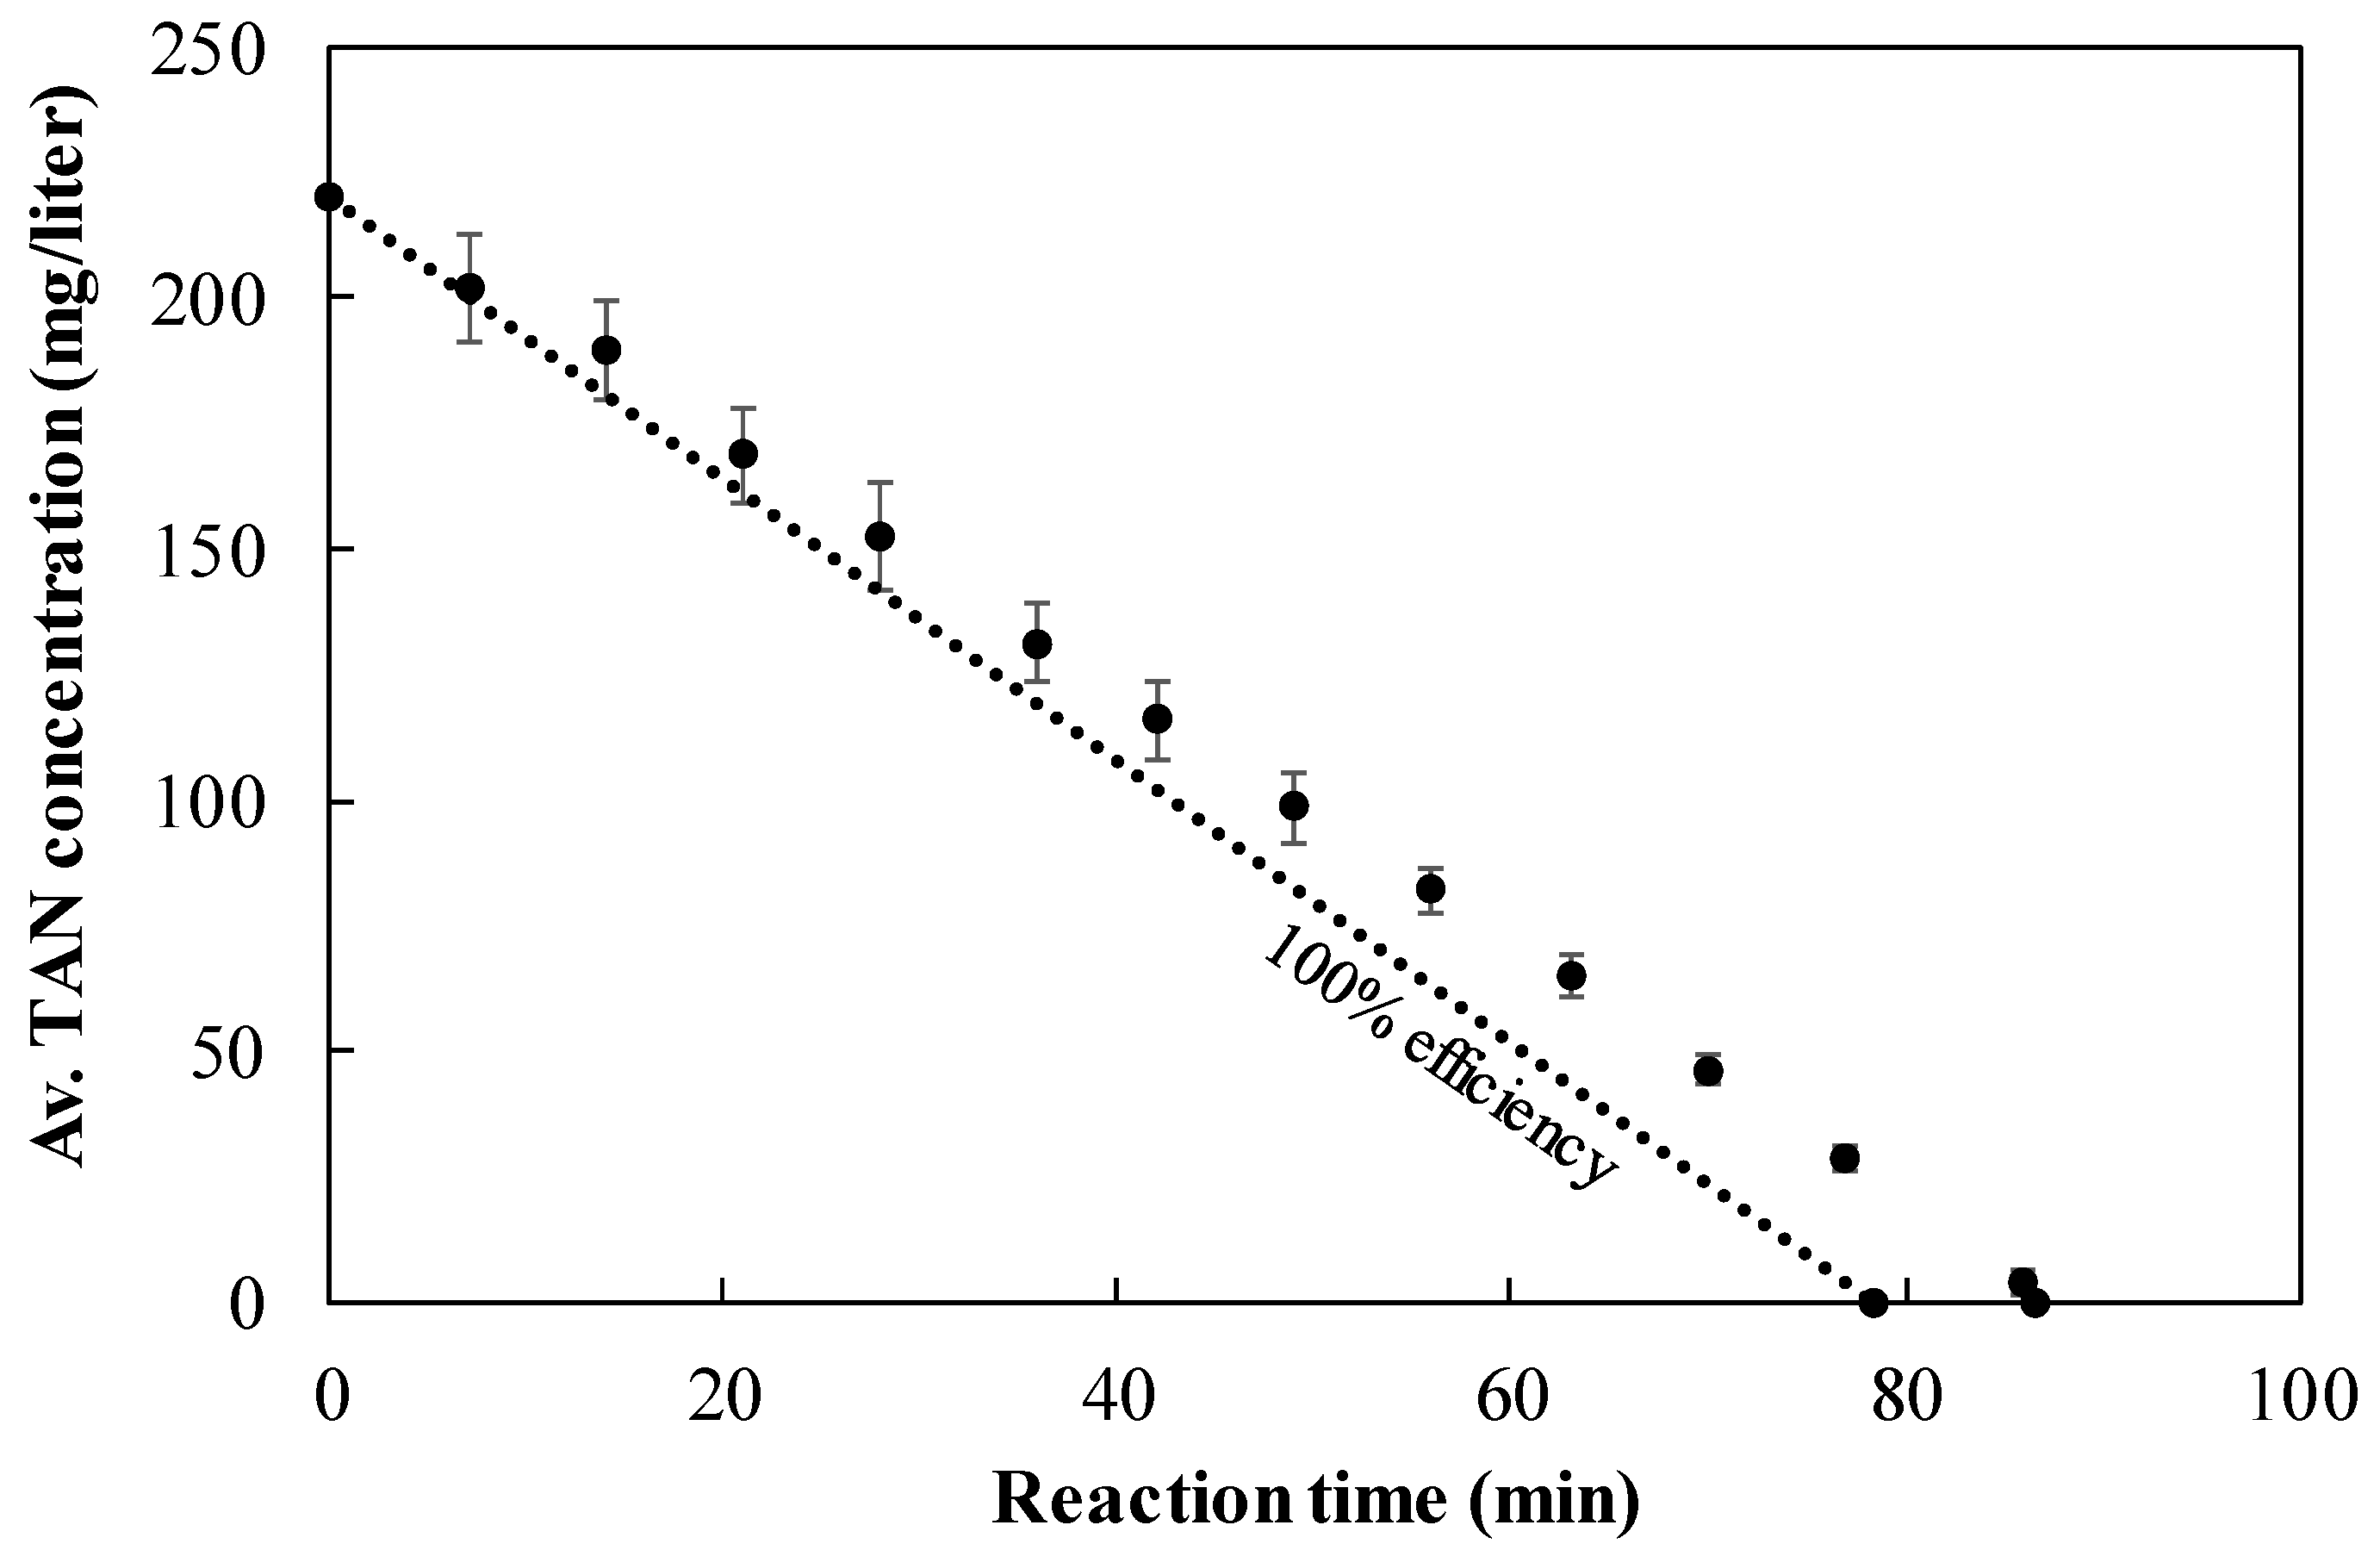 Chemengineering Free Full Text Removal Of Nitrate From Drinking Water By Ion Exchange Followed By Nzvi Based Reduction And Electrooxidation Of The Ammonia Product To N2 G Html